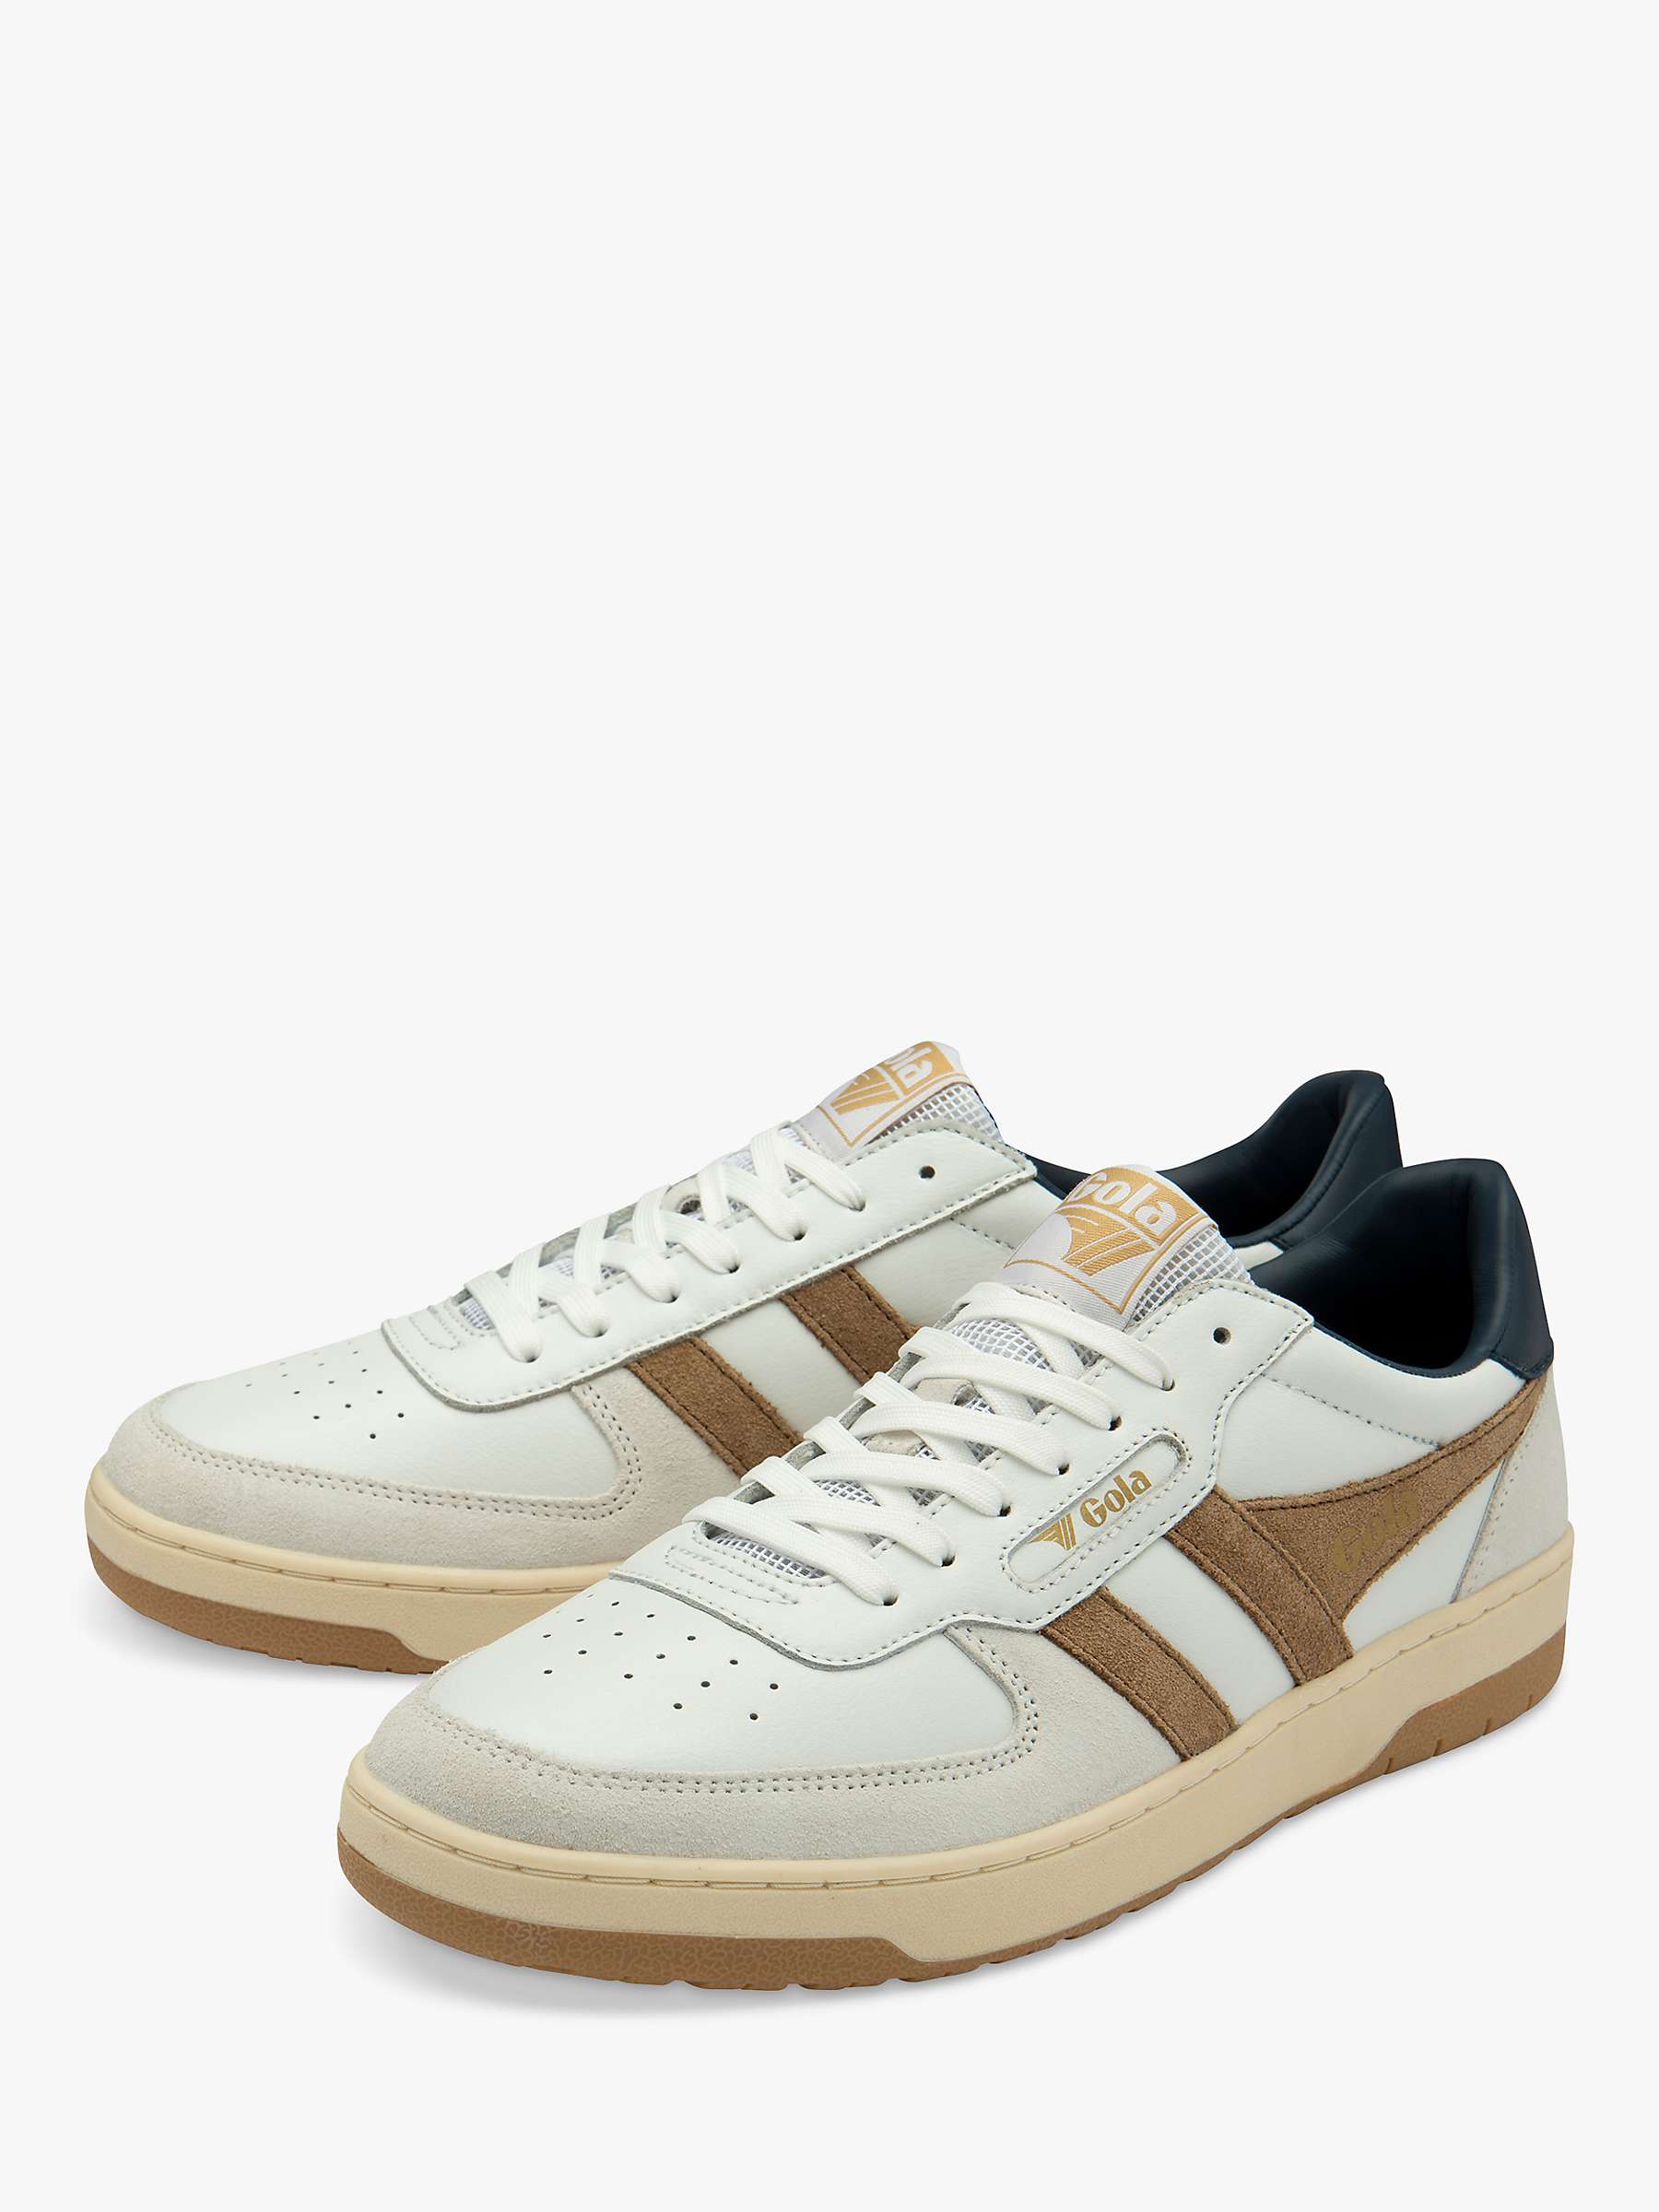 Buy Gola Classics Hawk Leather Lace Up Trainers, White/Tobacco/Navy Online at johnlewis.com